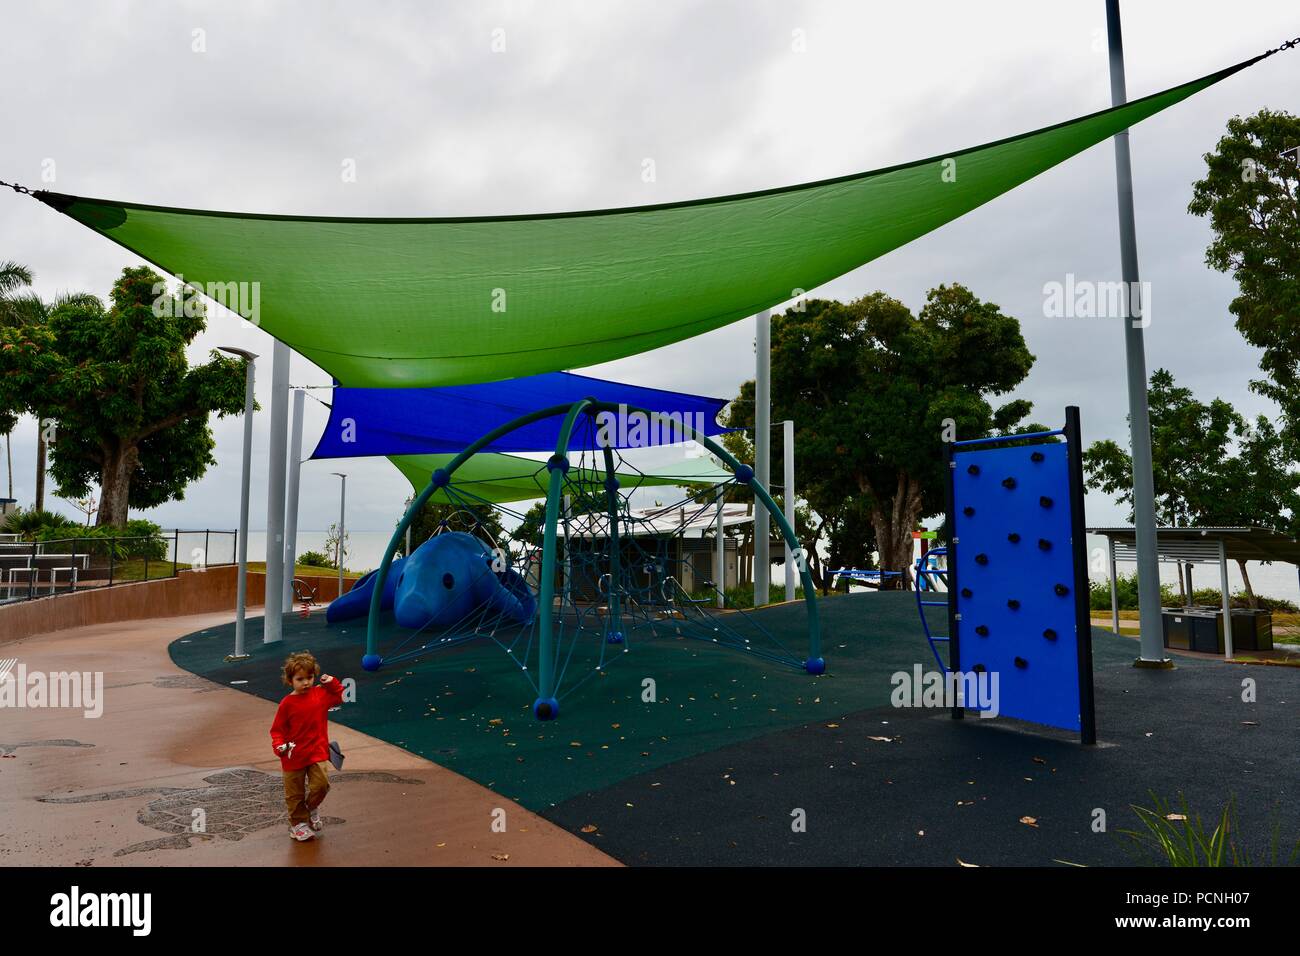 The childrens playground at Cardwell, Queensland, Australia Stock Photo